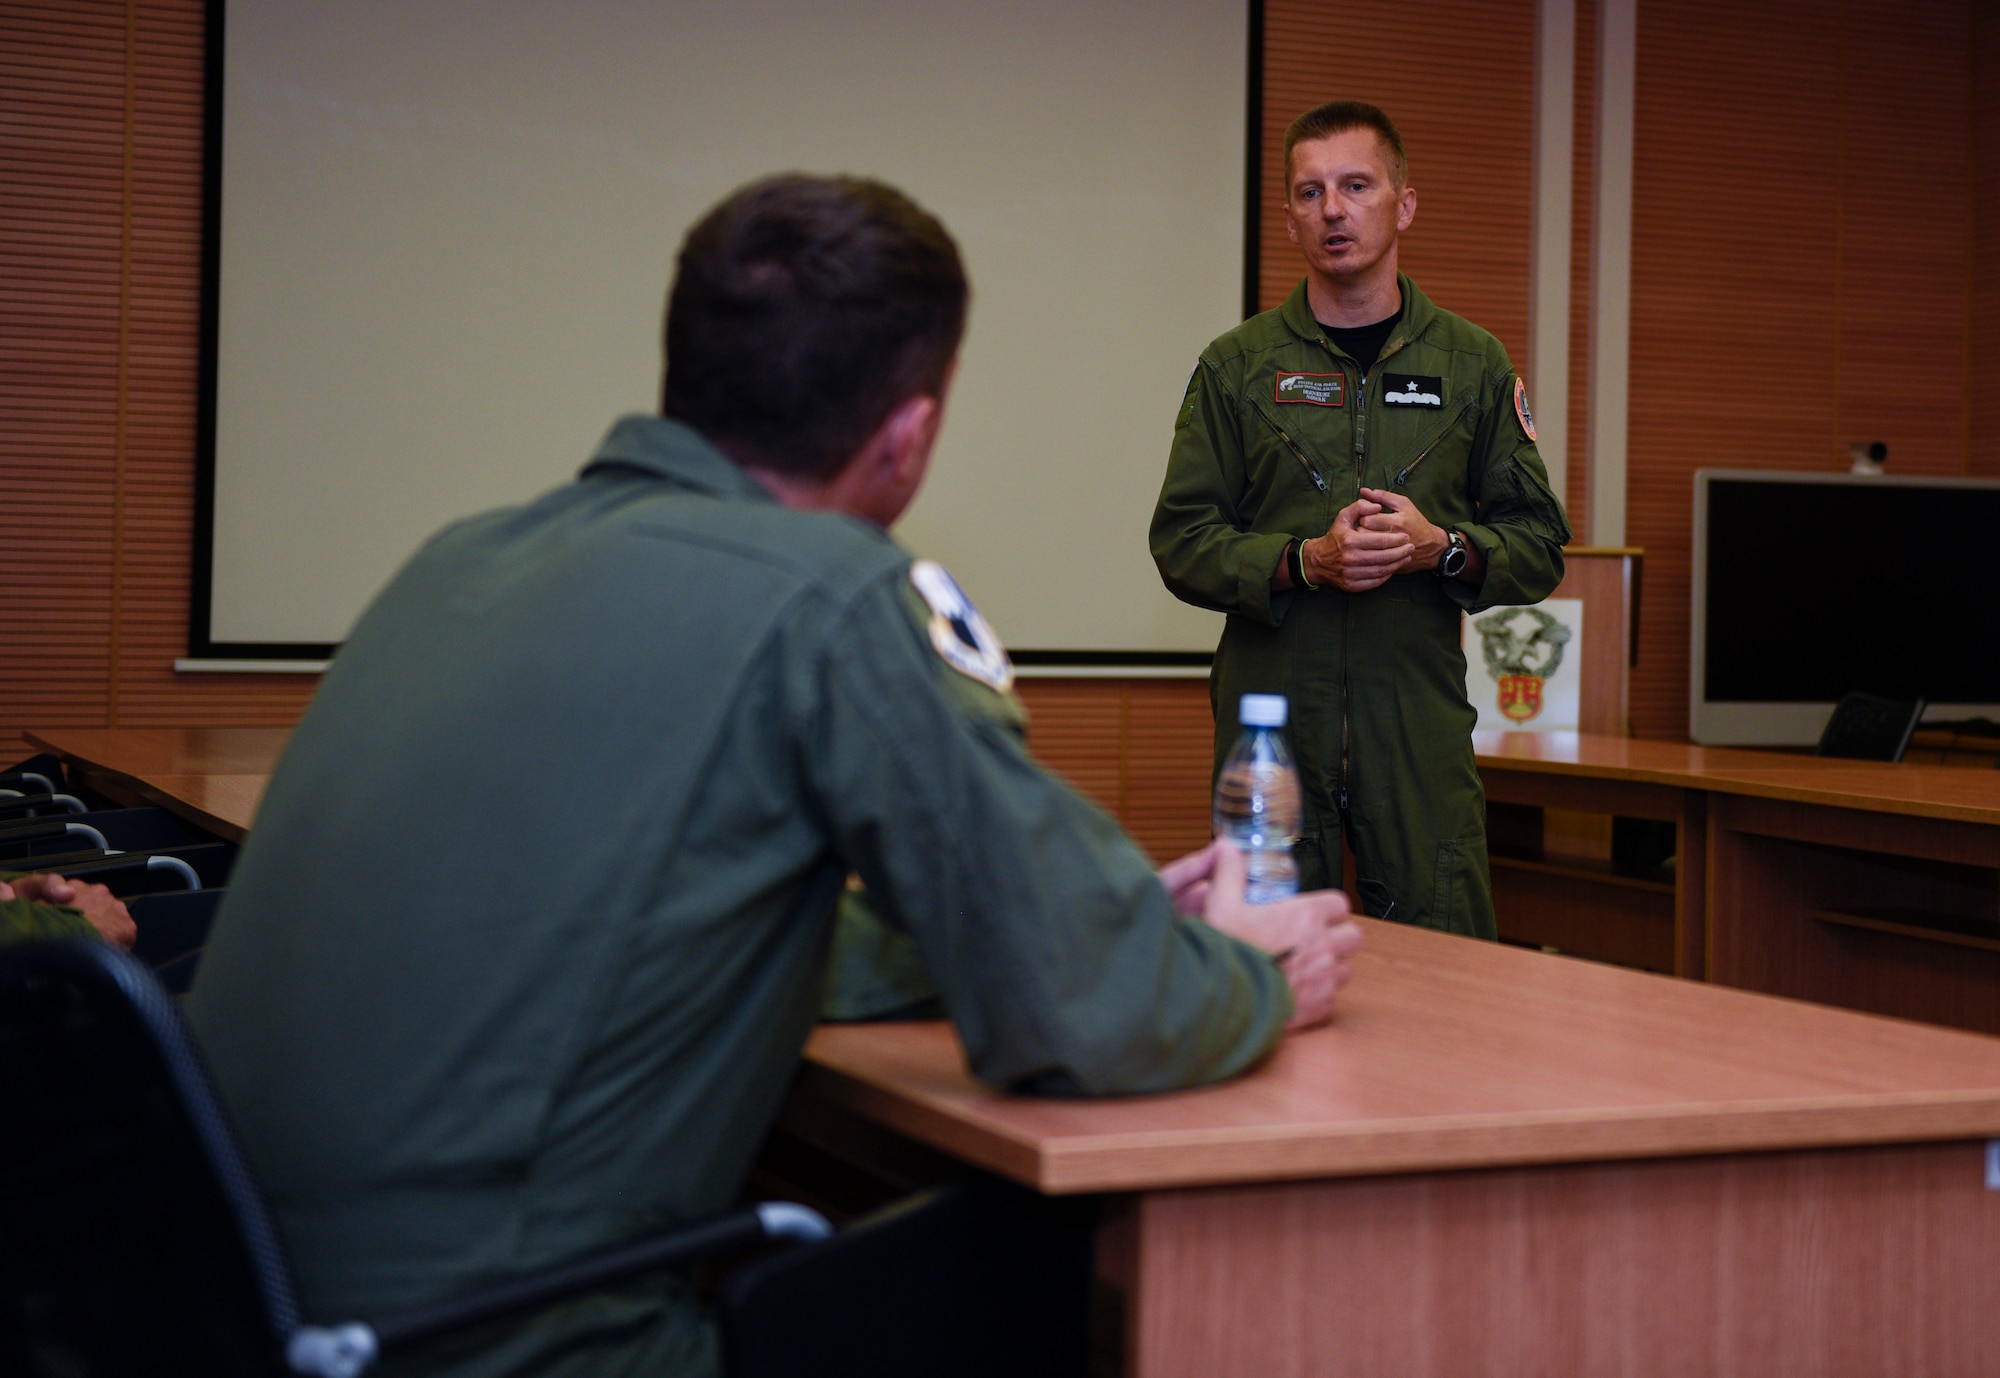 U.S. Air Force Col. David Epperson, front, 52nd Fighter Wing commander, listens to a briefing by Polish Air Force Brig. Gen. Iteneusz Nowak, 2nd Tactical Air Wing commander, at Łask AB, Poland, August 21, 2020. Nowak and Epperson were able to discuss different perspectives, the Aviation Detachment Rotation, and enhance the progress and partnerships between the U.S. and Polish Allies. (U.S. Air Force photo by Senior Airman Melody W. Howley)